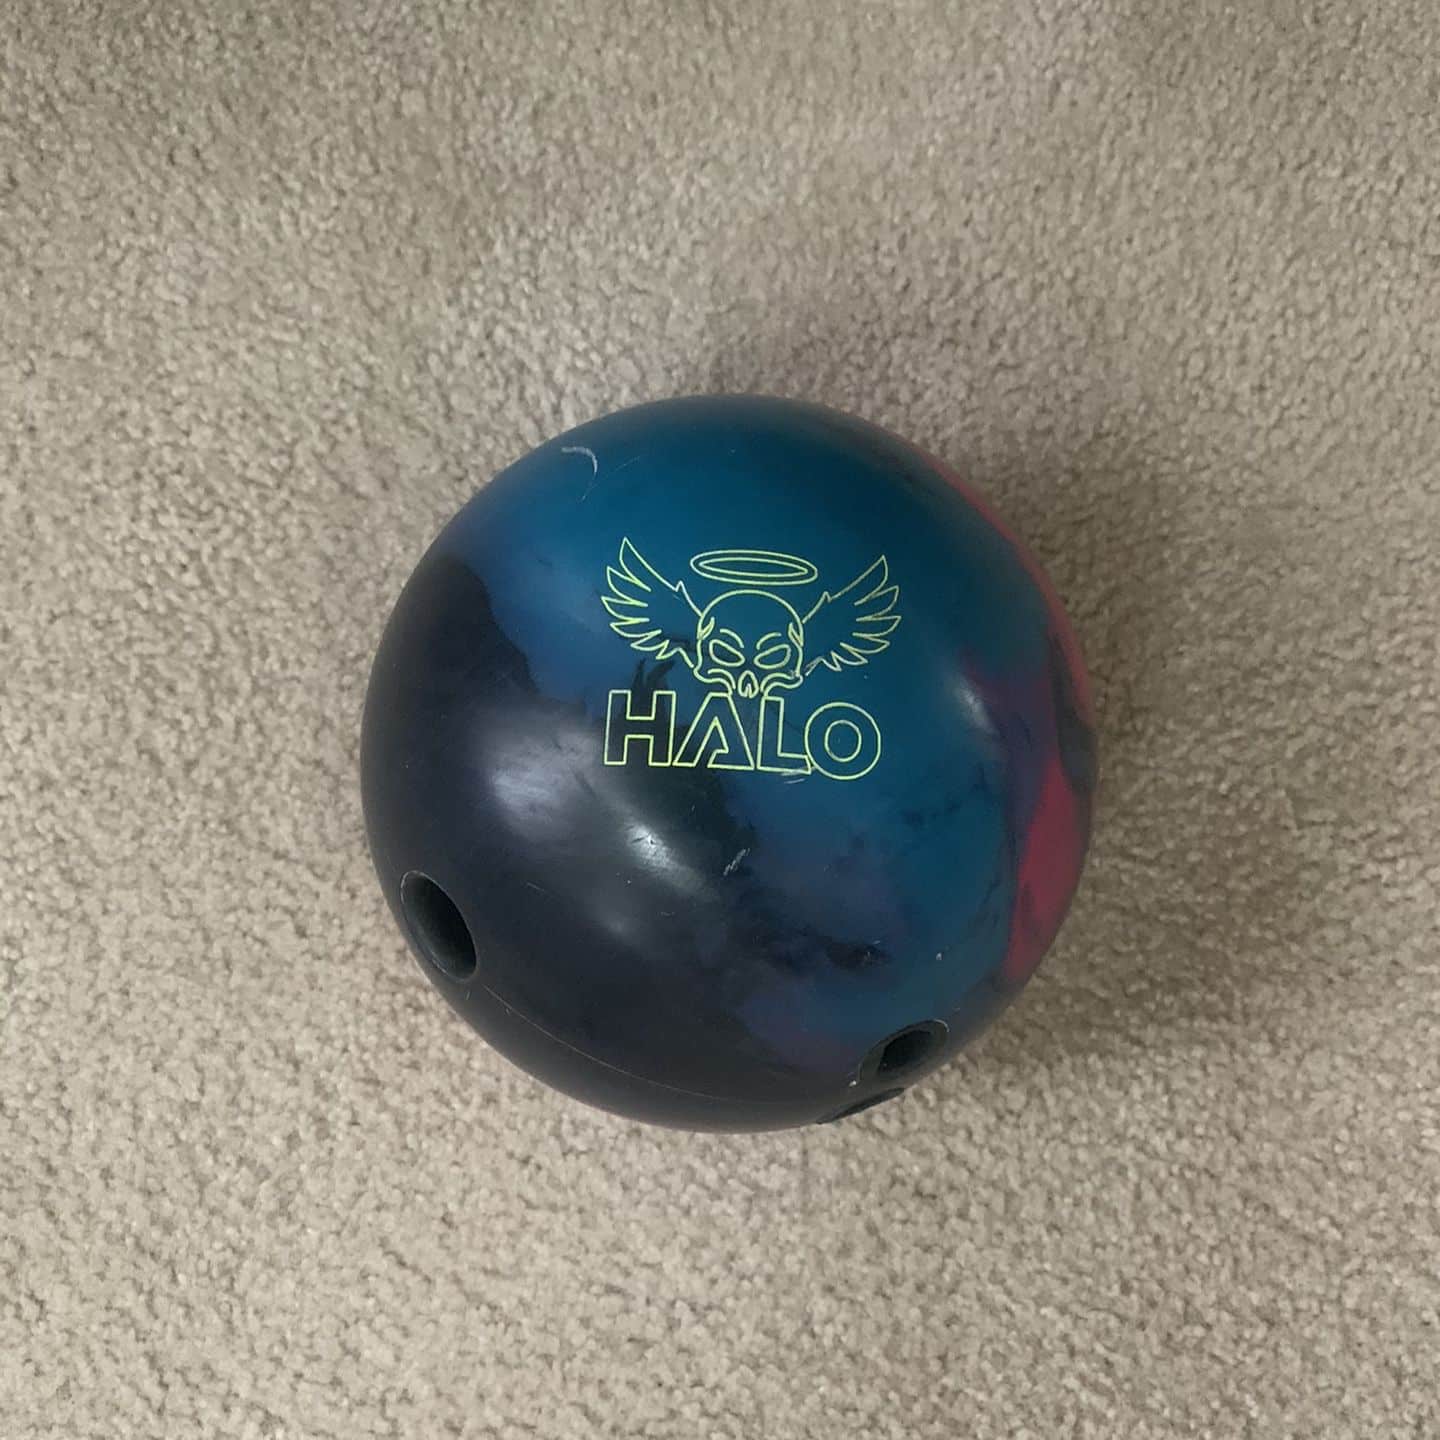 Is A 15lb Bowling Ball Too Heavy?